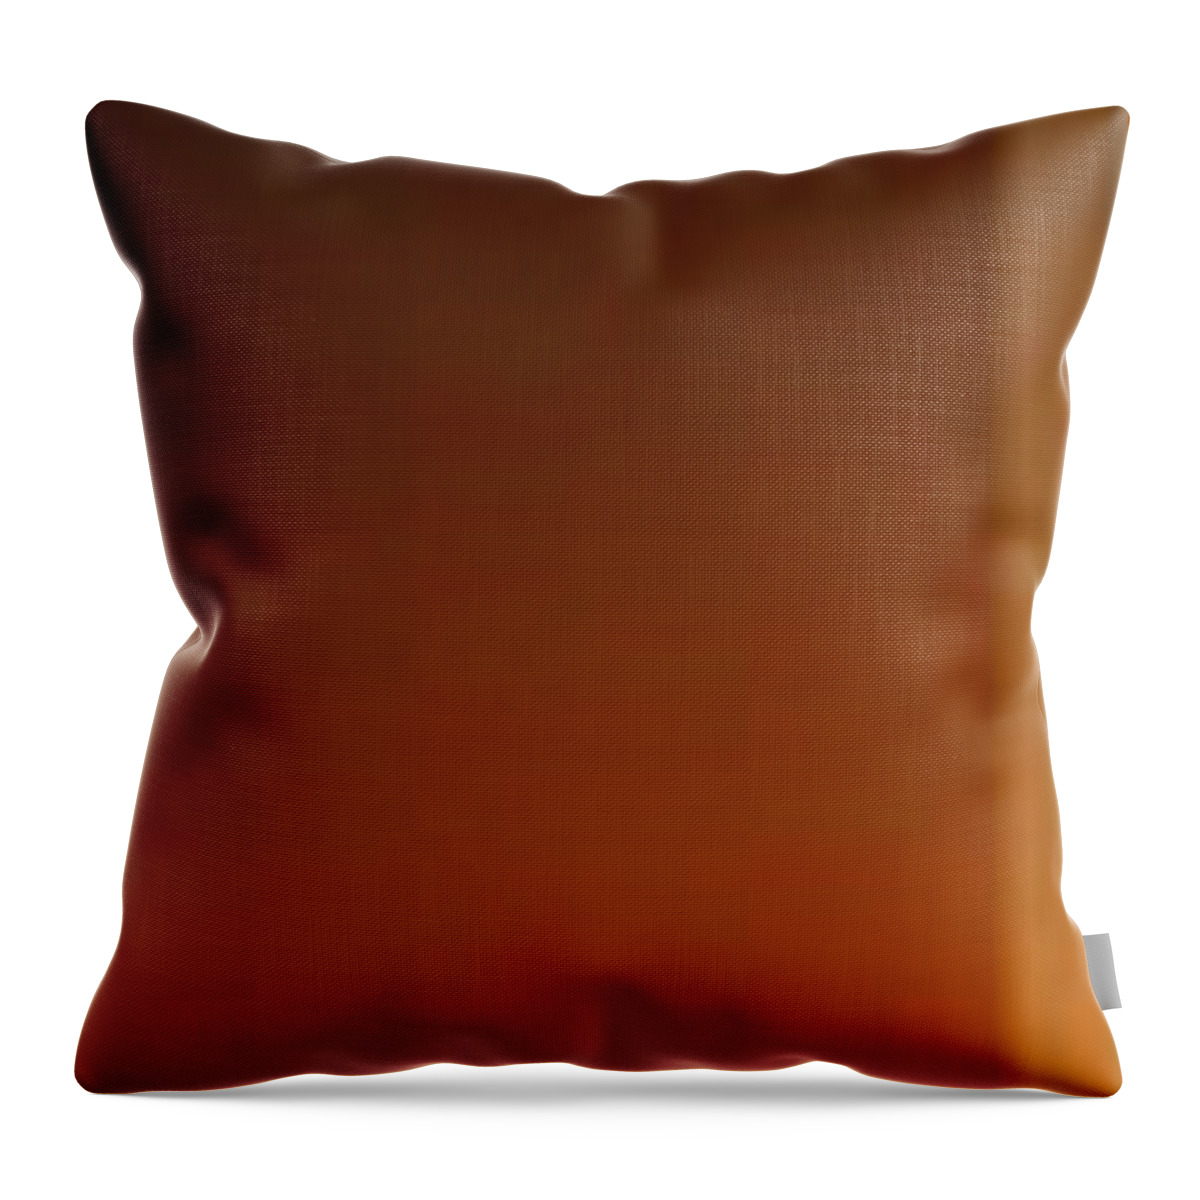 Oil Throw Pillow featuring the painting Brown Totem by Matteo TOTARO